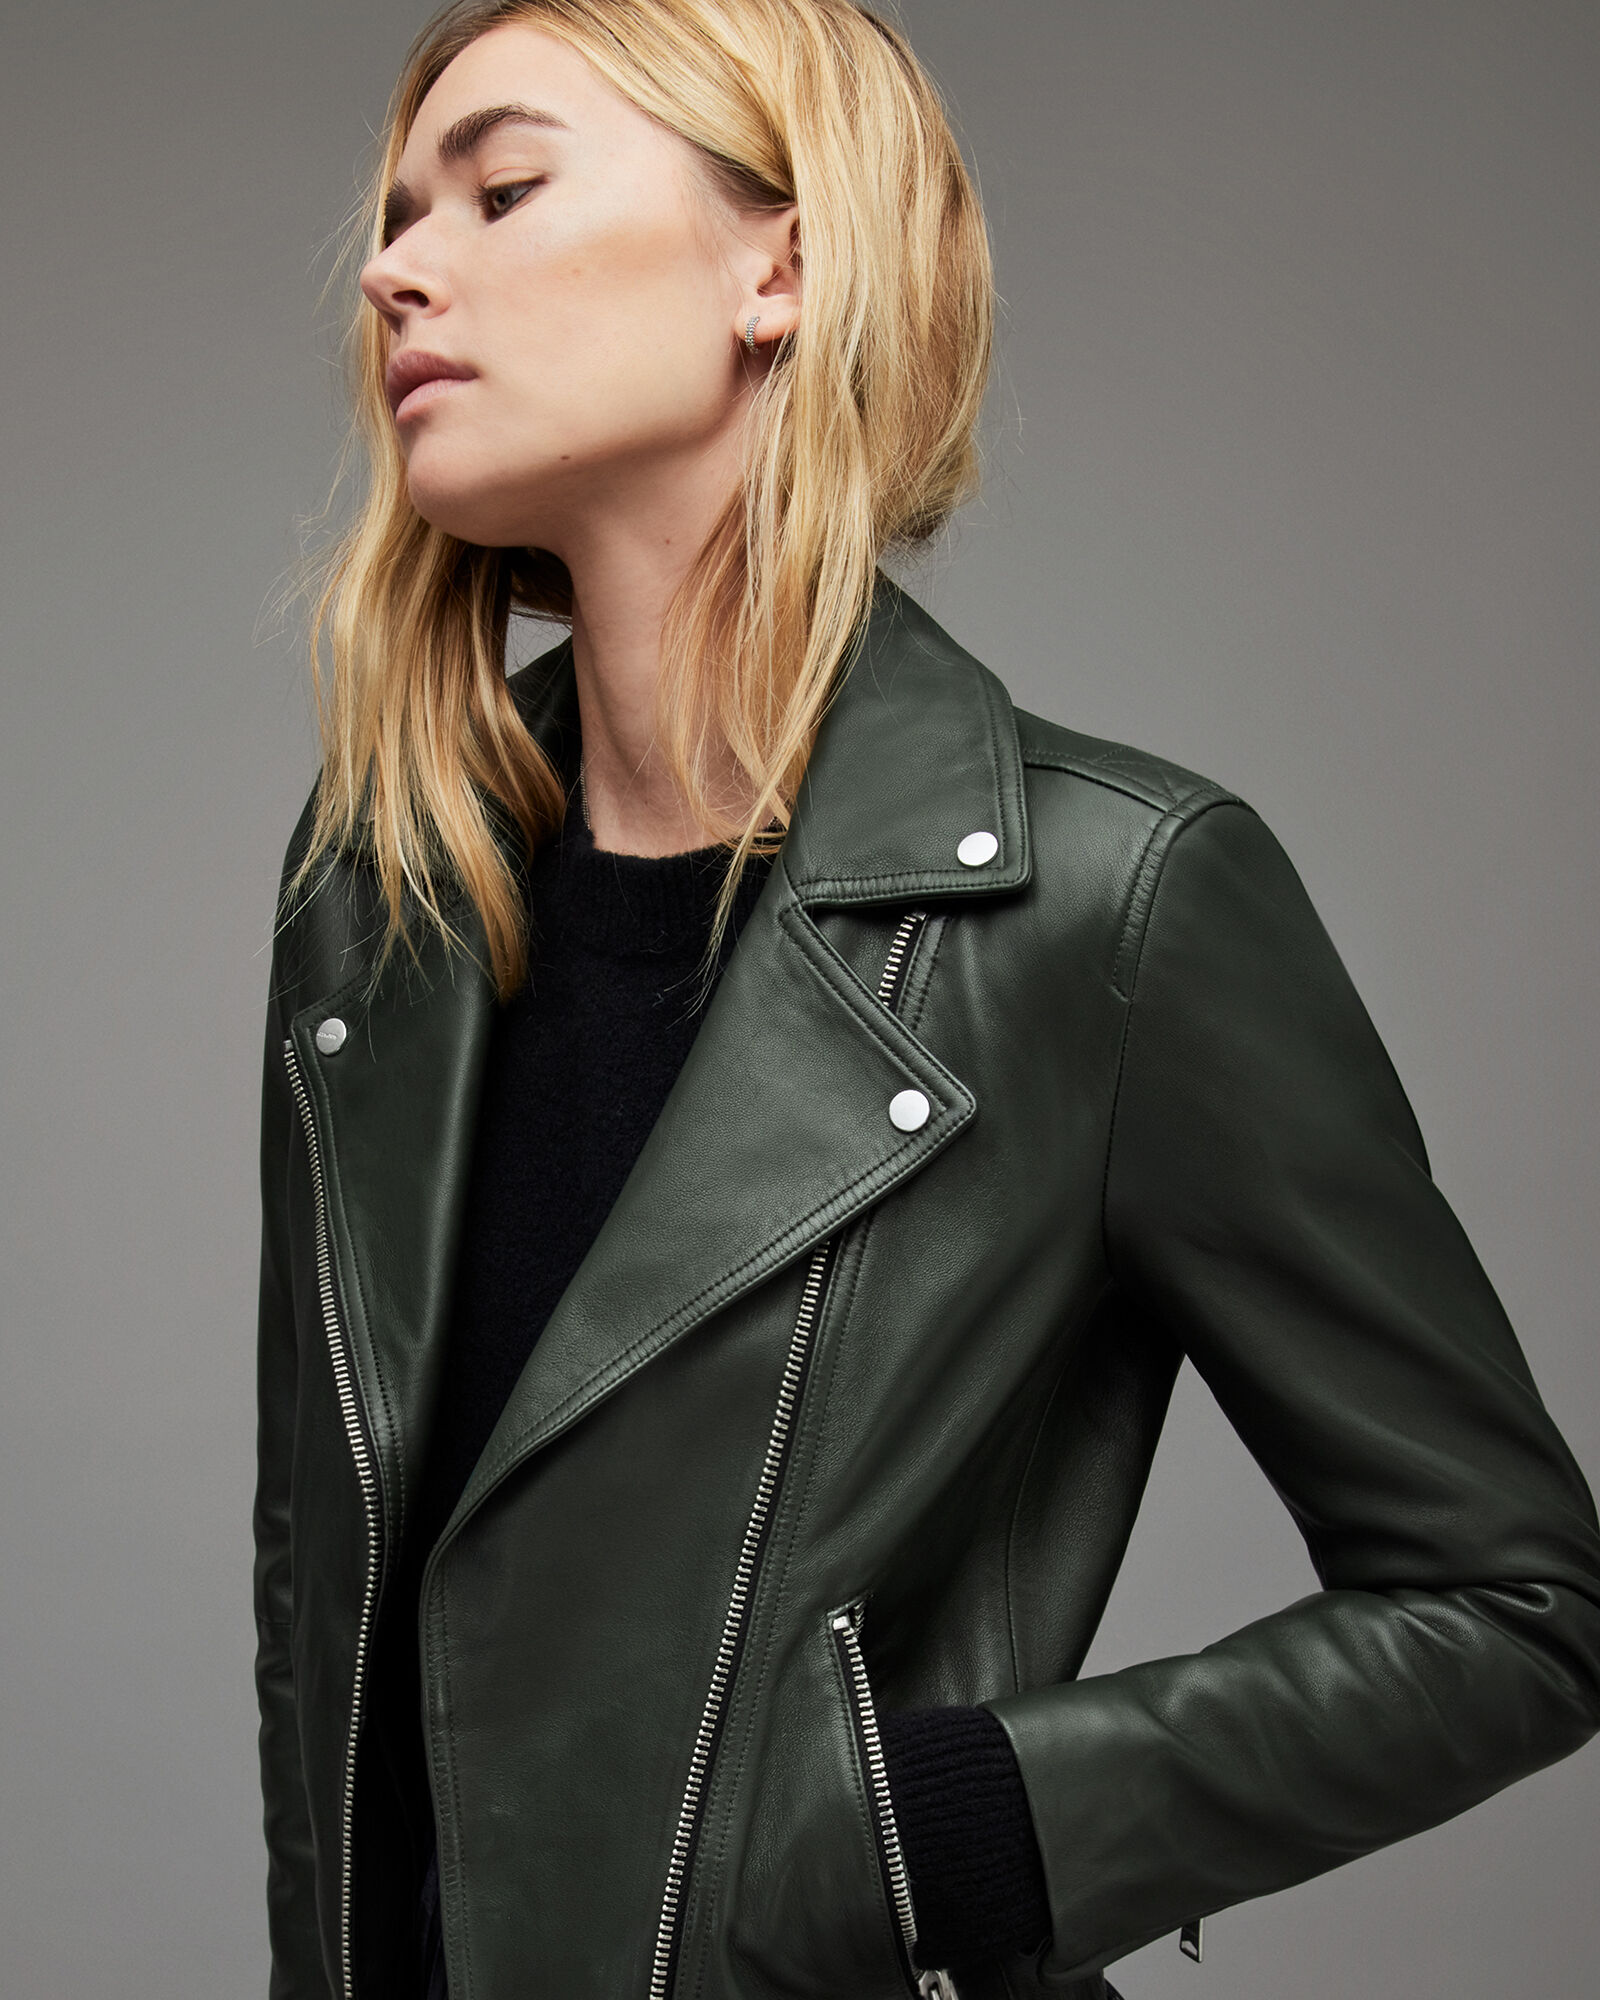 Women's Leather Clothing & Leather Outfits | ALLSAINTS US